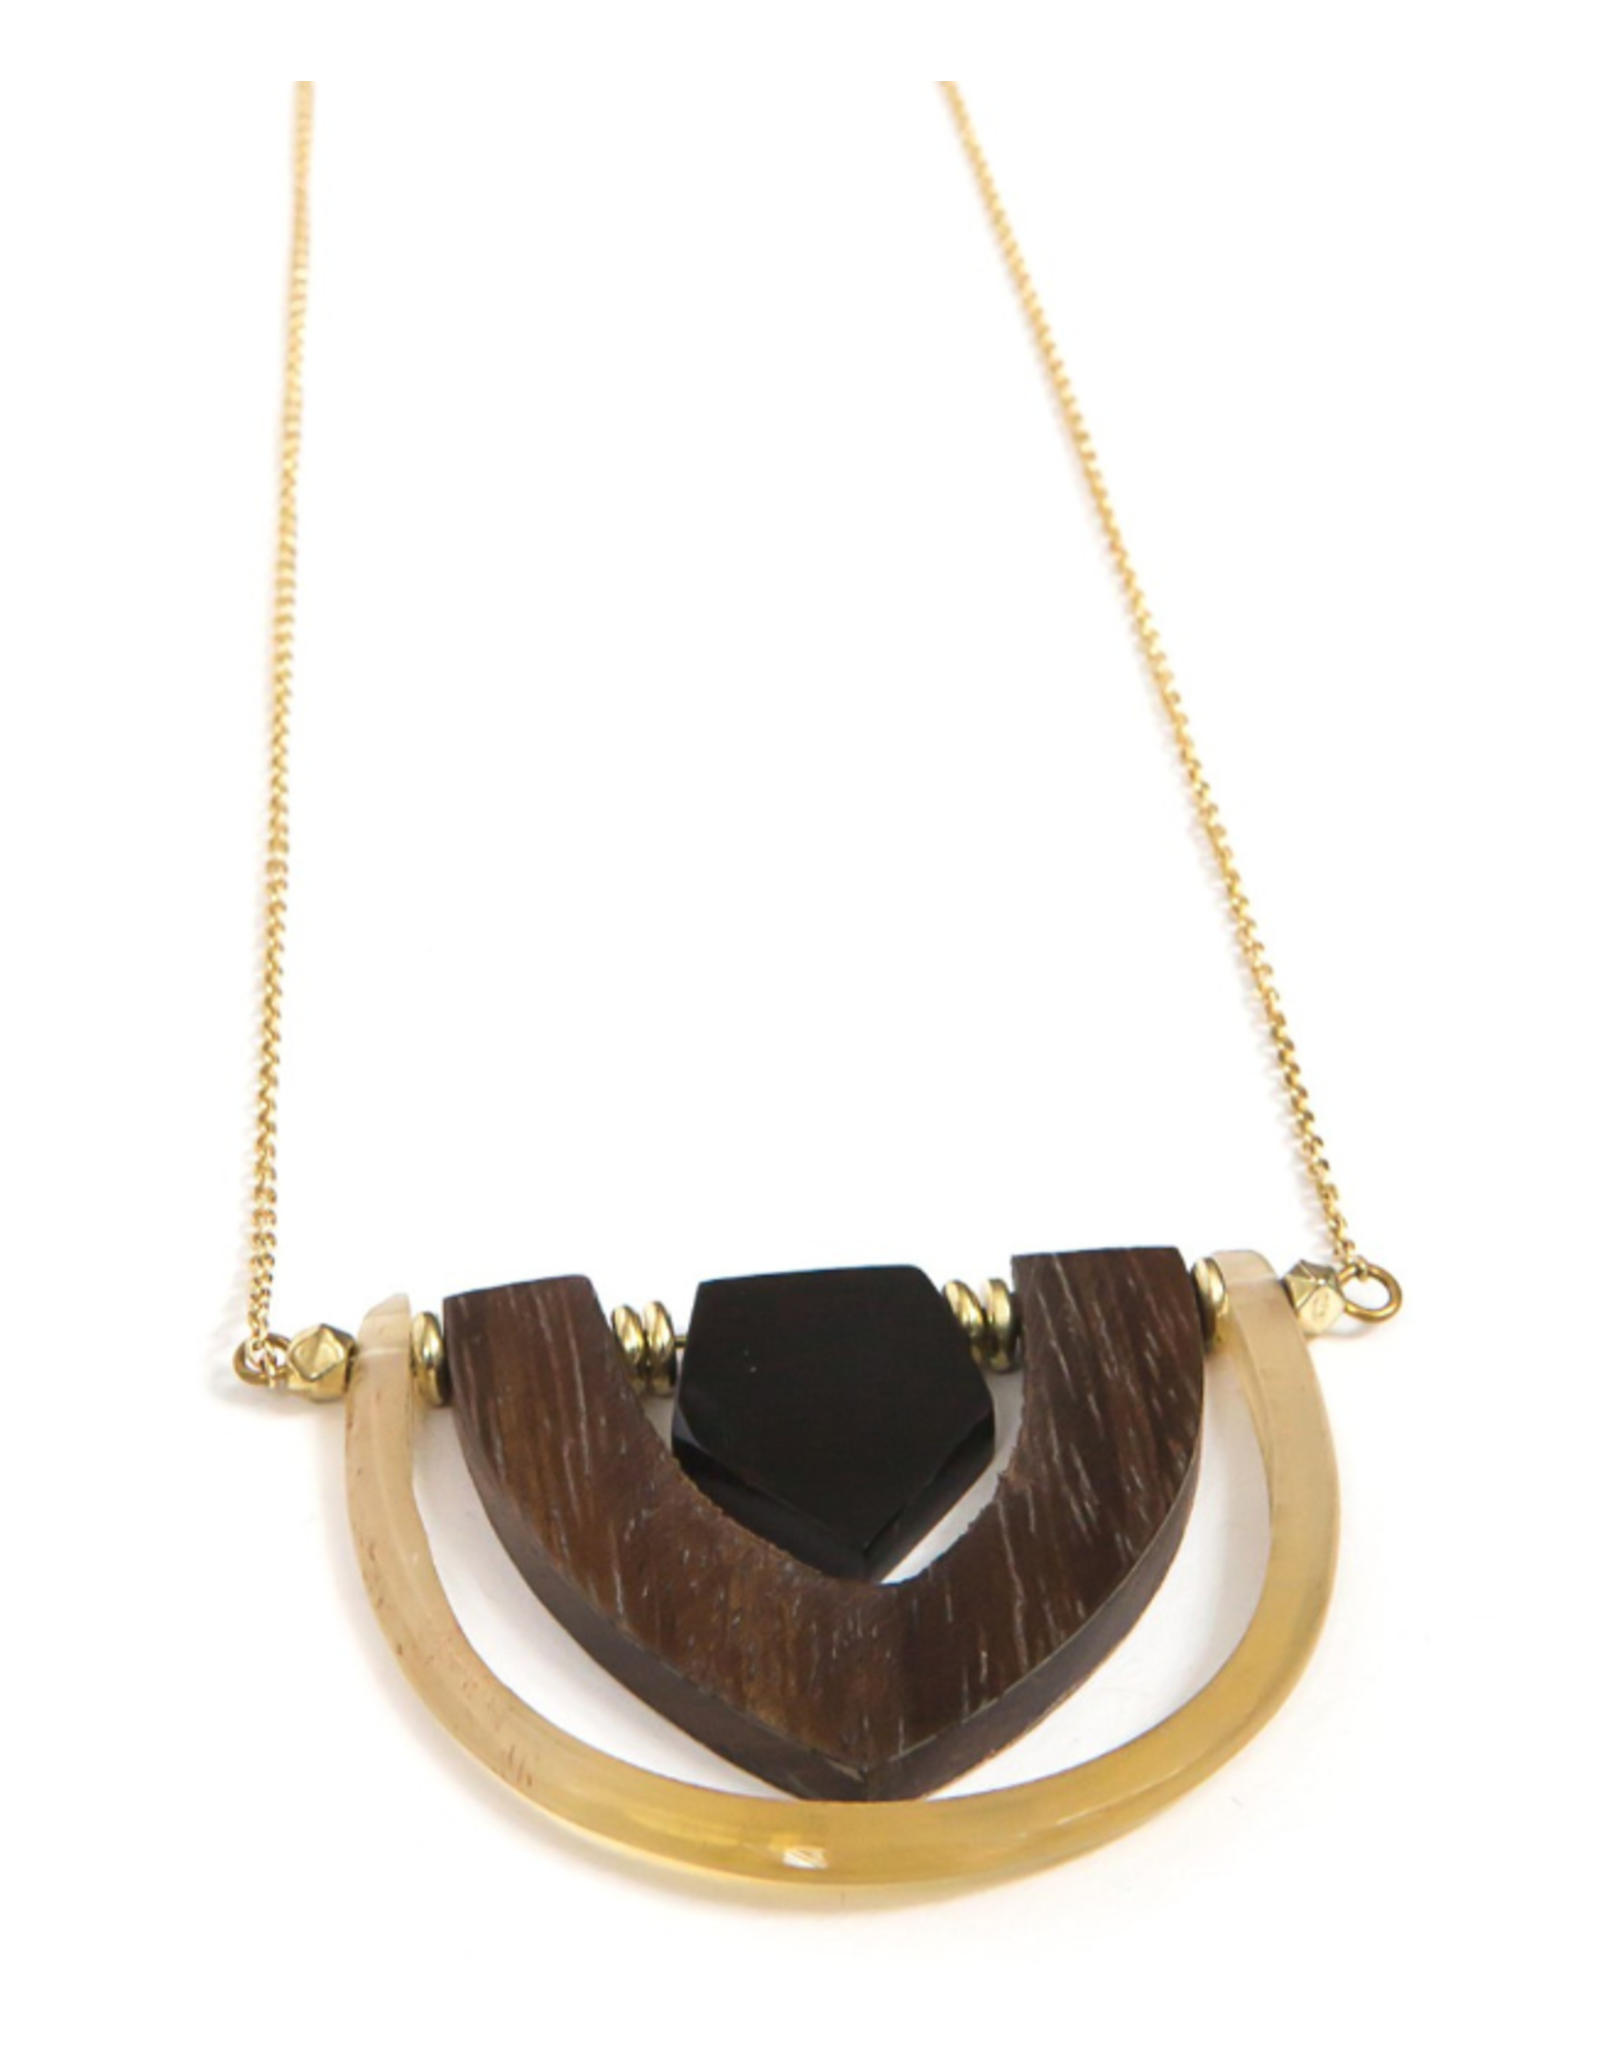 India Interconnection Horn & Wood Necklace, India